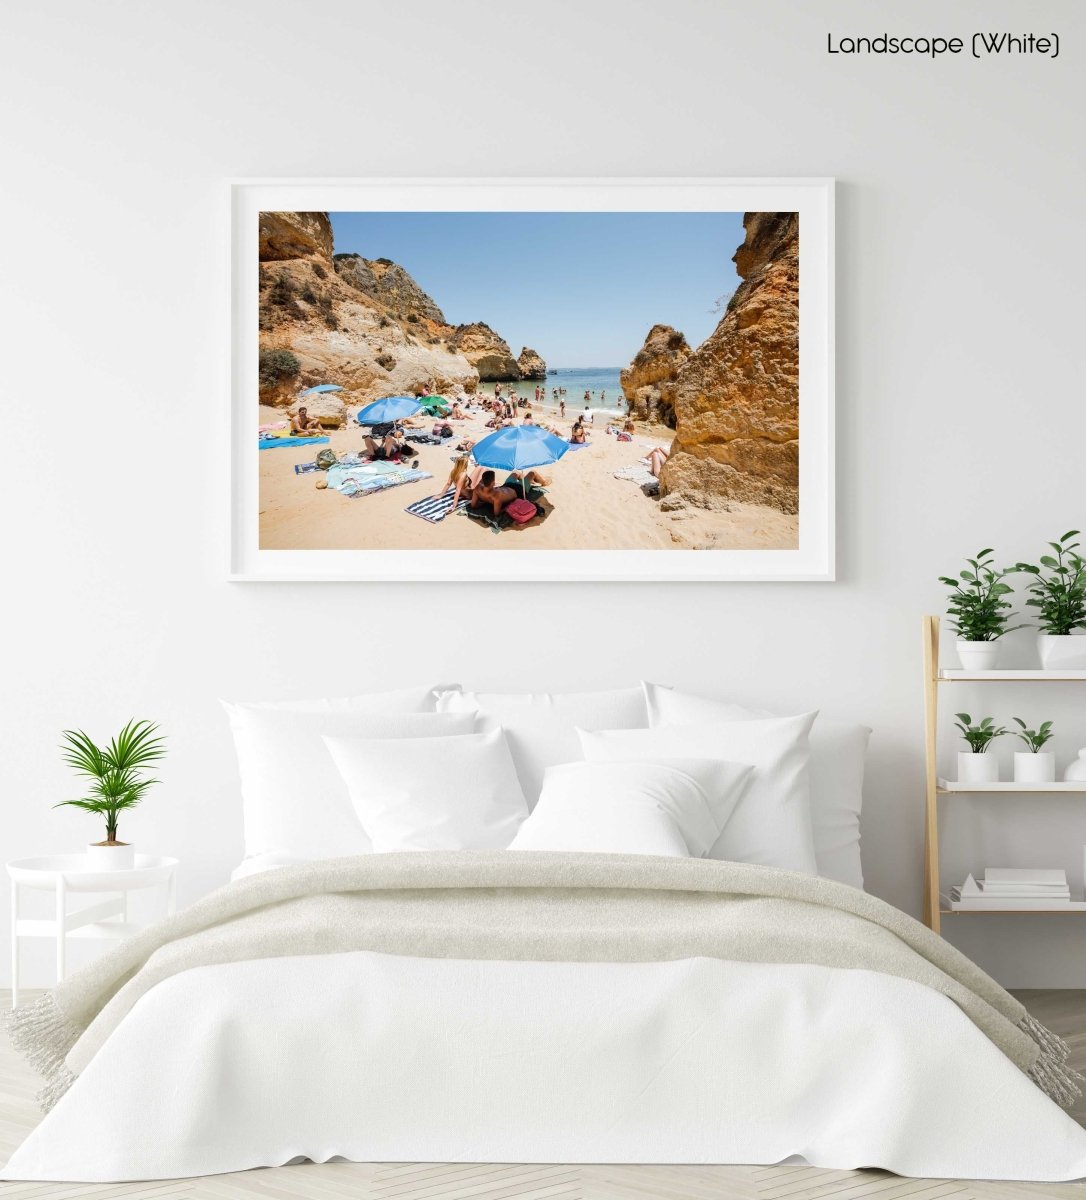 Blue umbrellas and people on Camilo beach Portugal in a white fine art frame